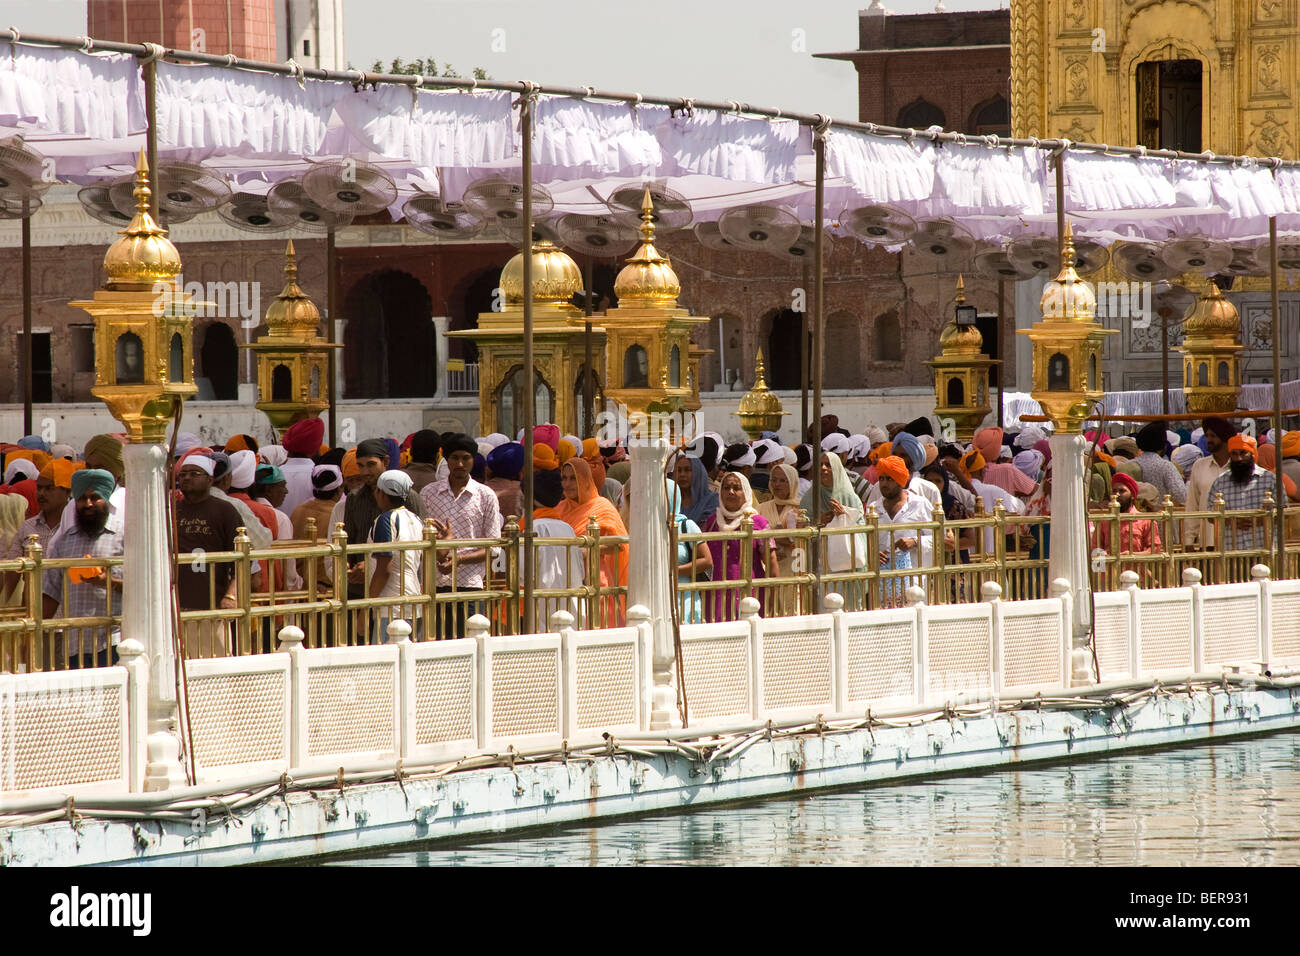 Devotees lined up to pay their respect to Guru Granth Sahib during the celebration of Diwali in Amritsar, Punjab India Stock Photo